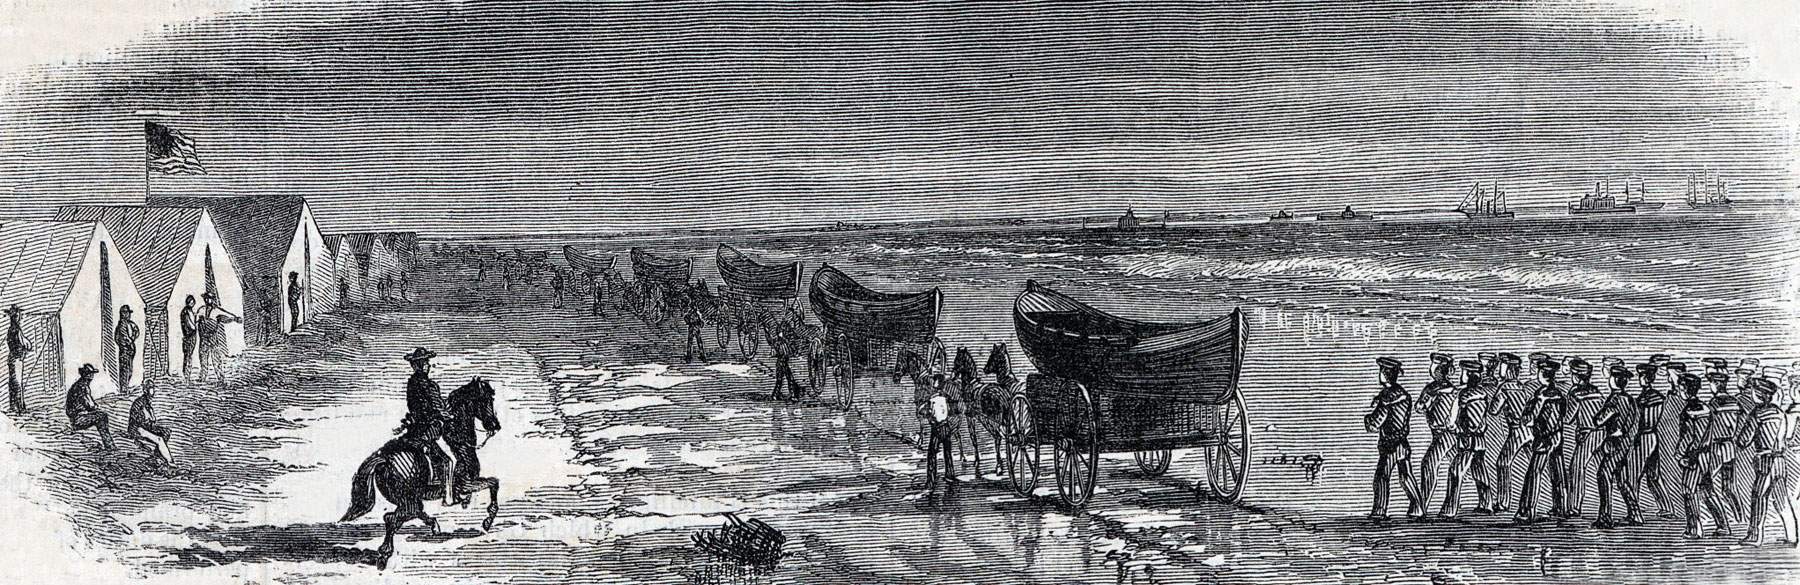 Preparing Union small boat attack on Battery Gregg and Cumming's Point, September 5, 1863, artist's impression, zoomable image